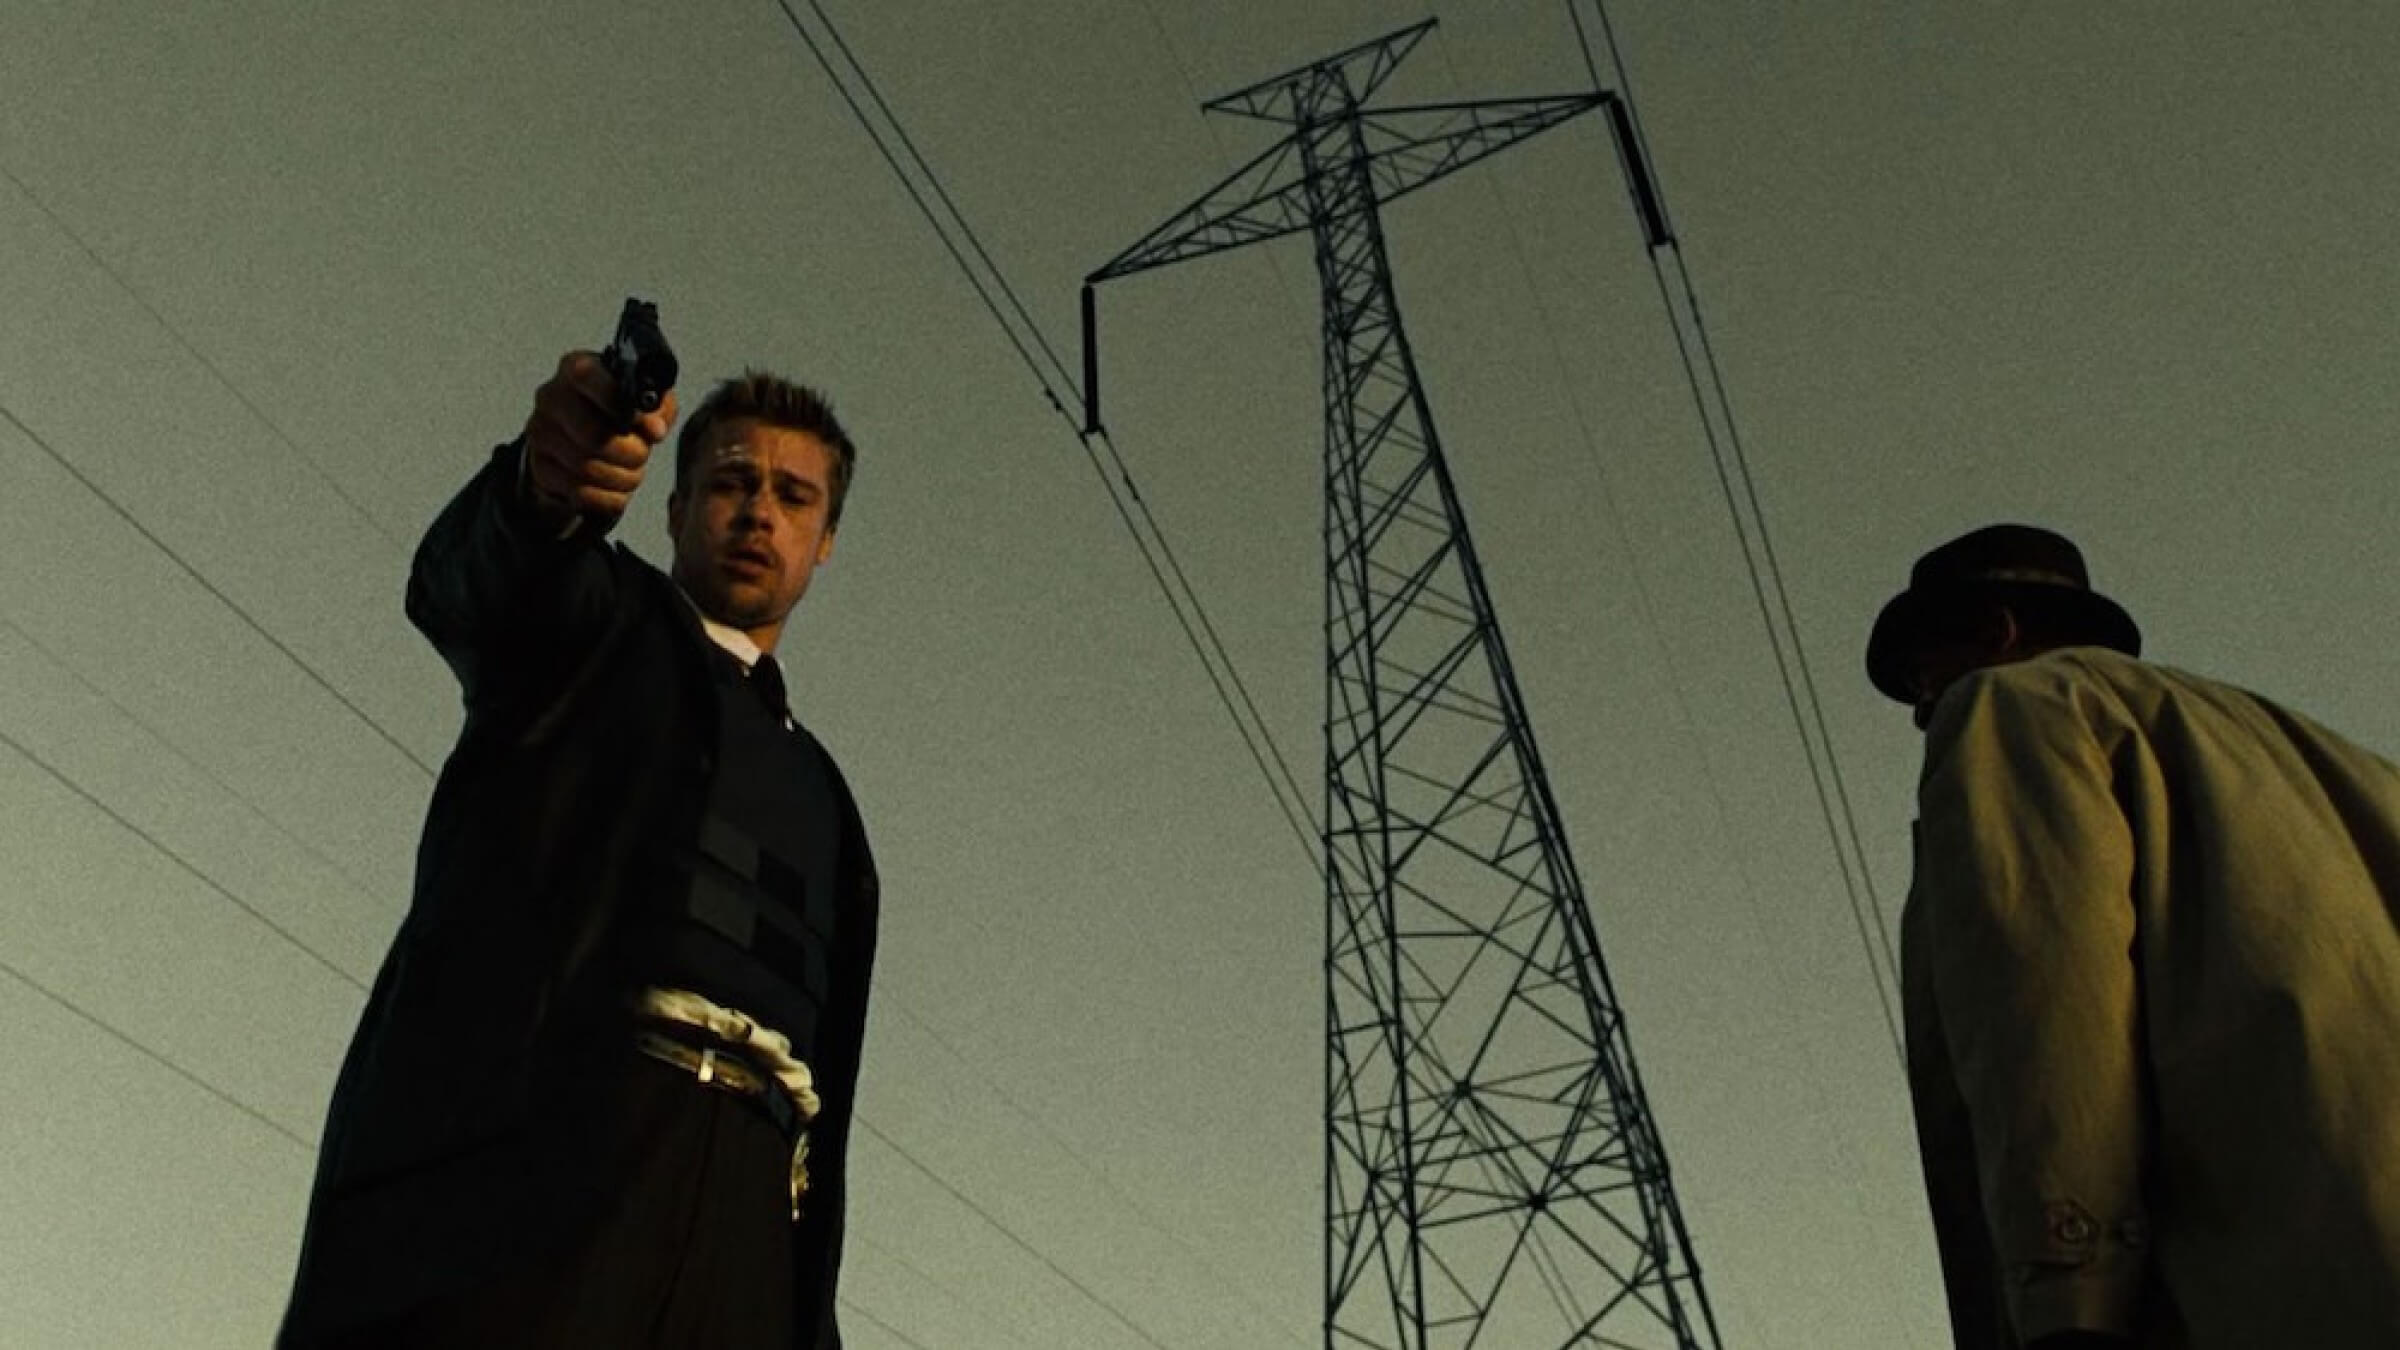 Brad Pitt did not want to change the ending of Se7en